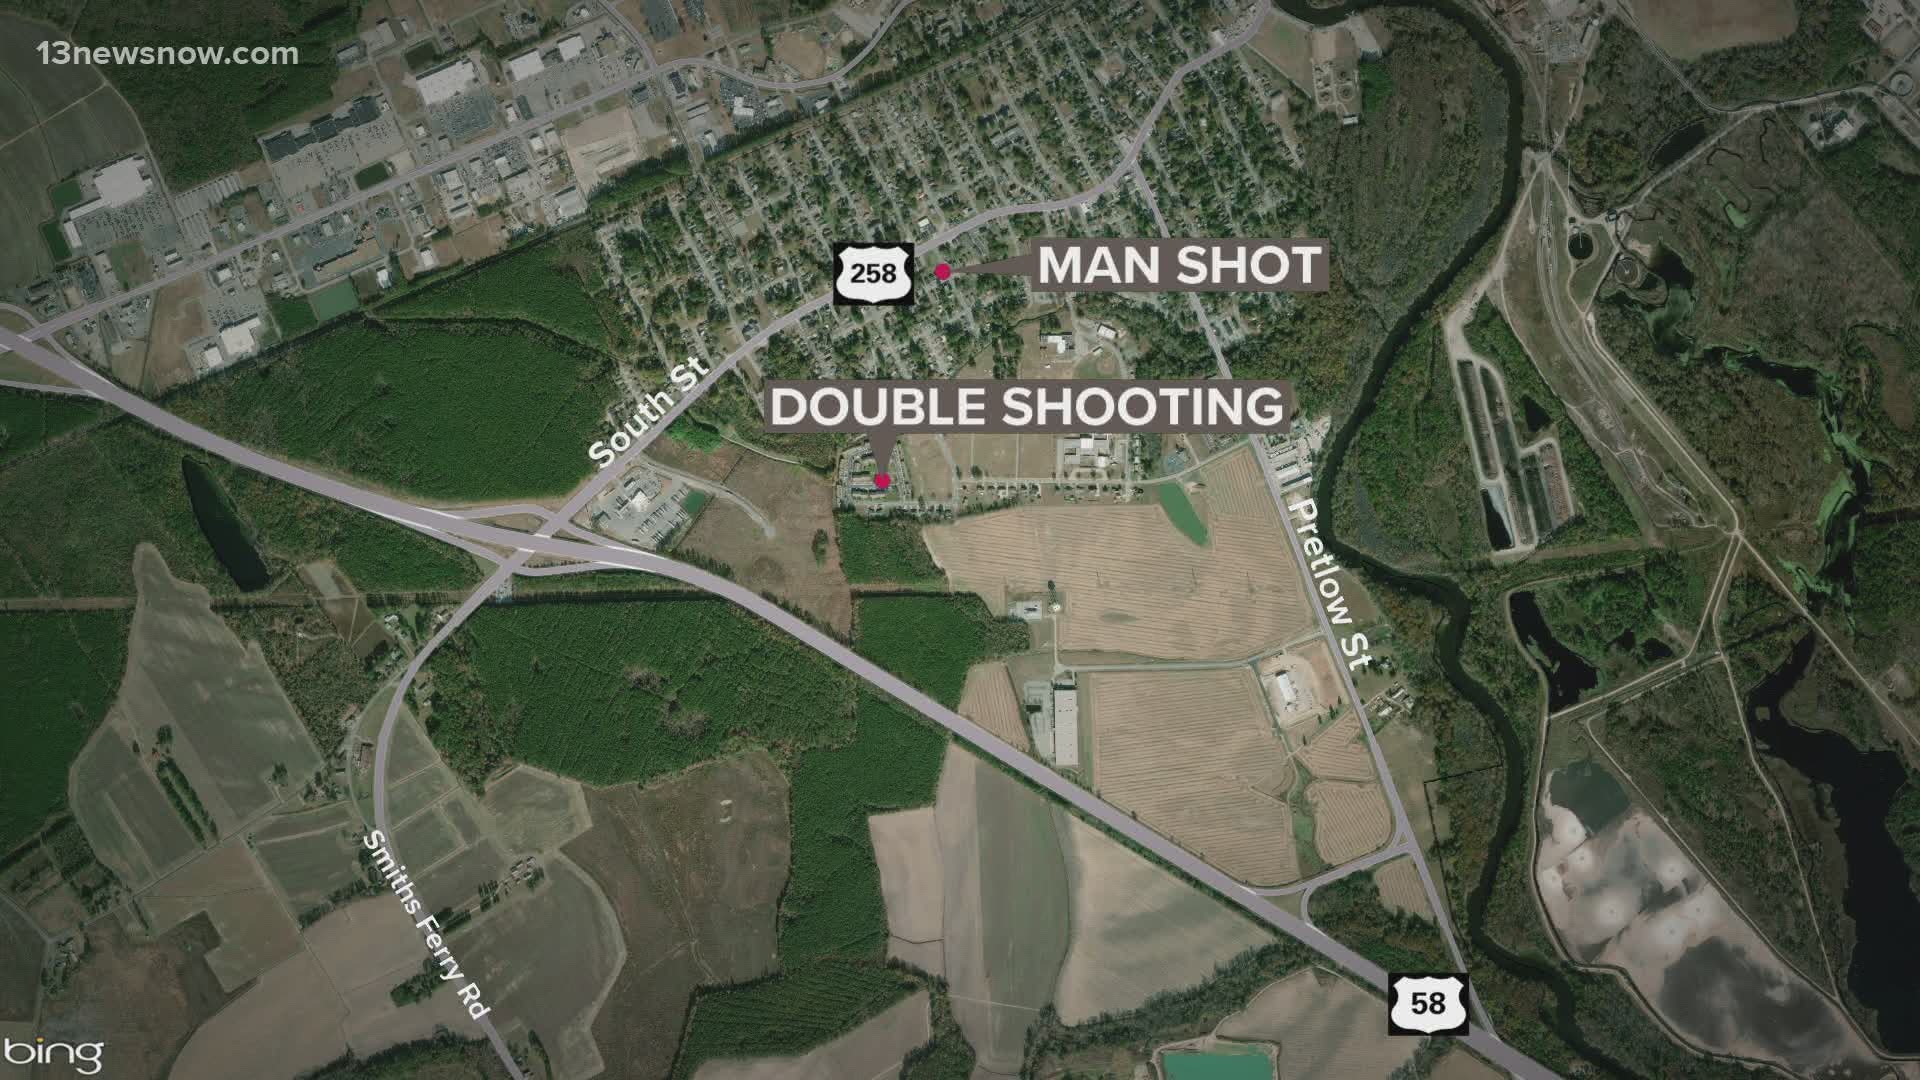 Two shootings hours apart in Franklin left two people hurt and a third person dead.